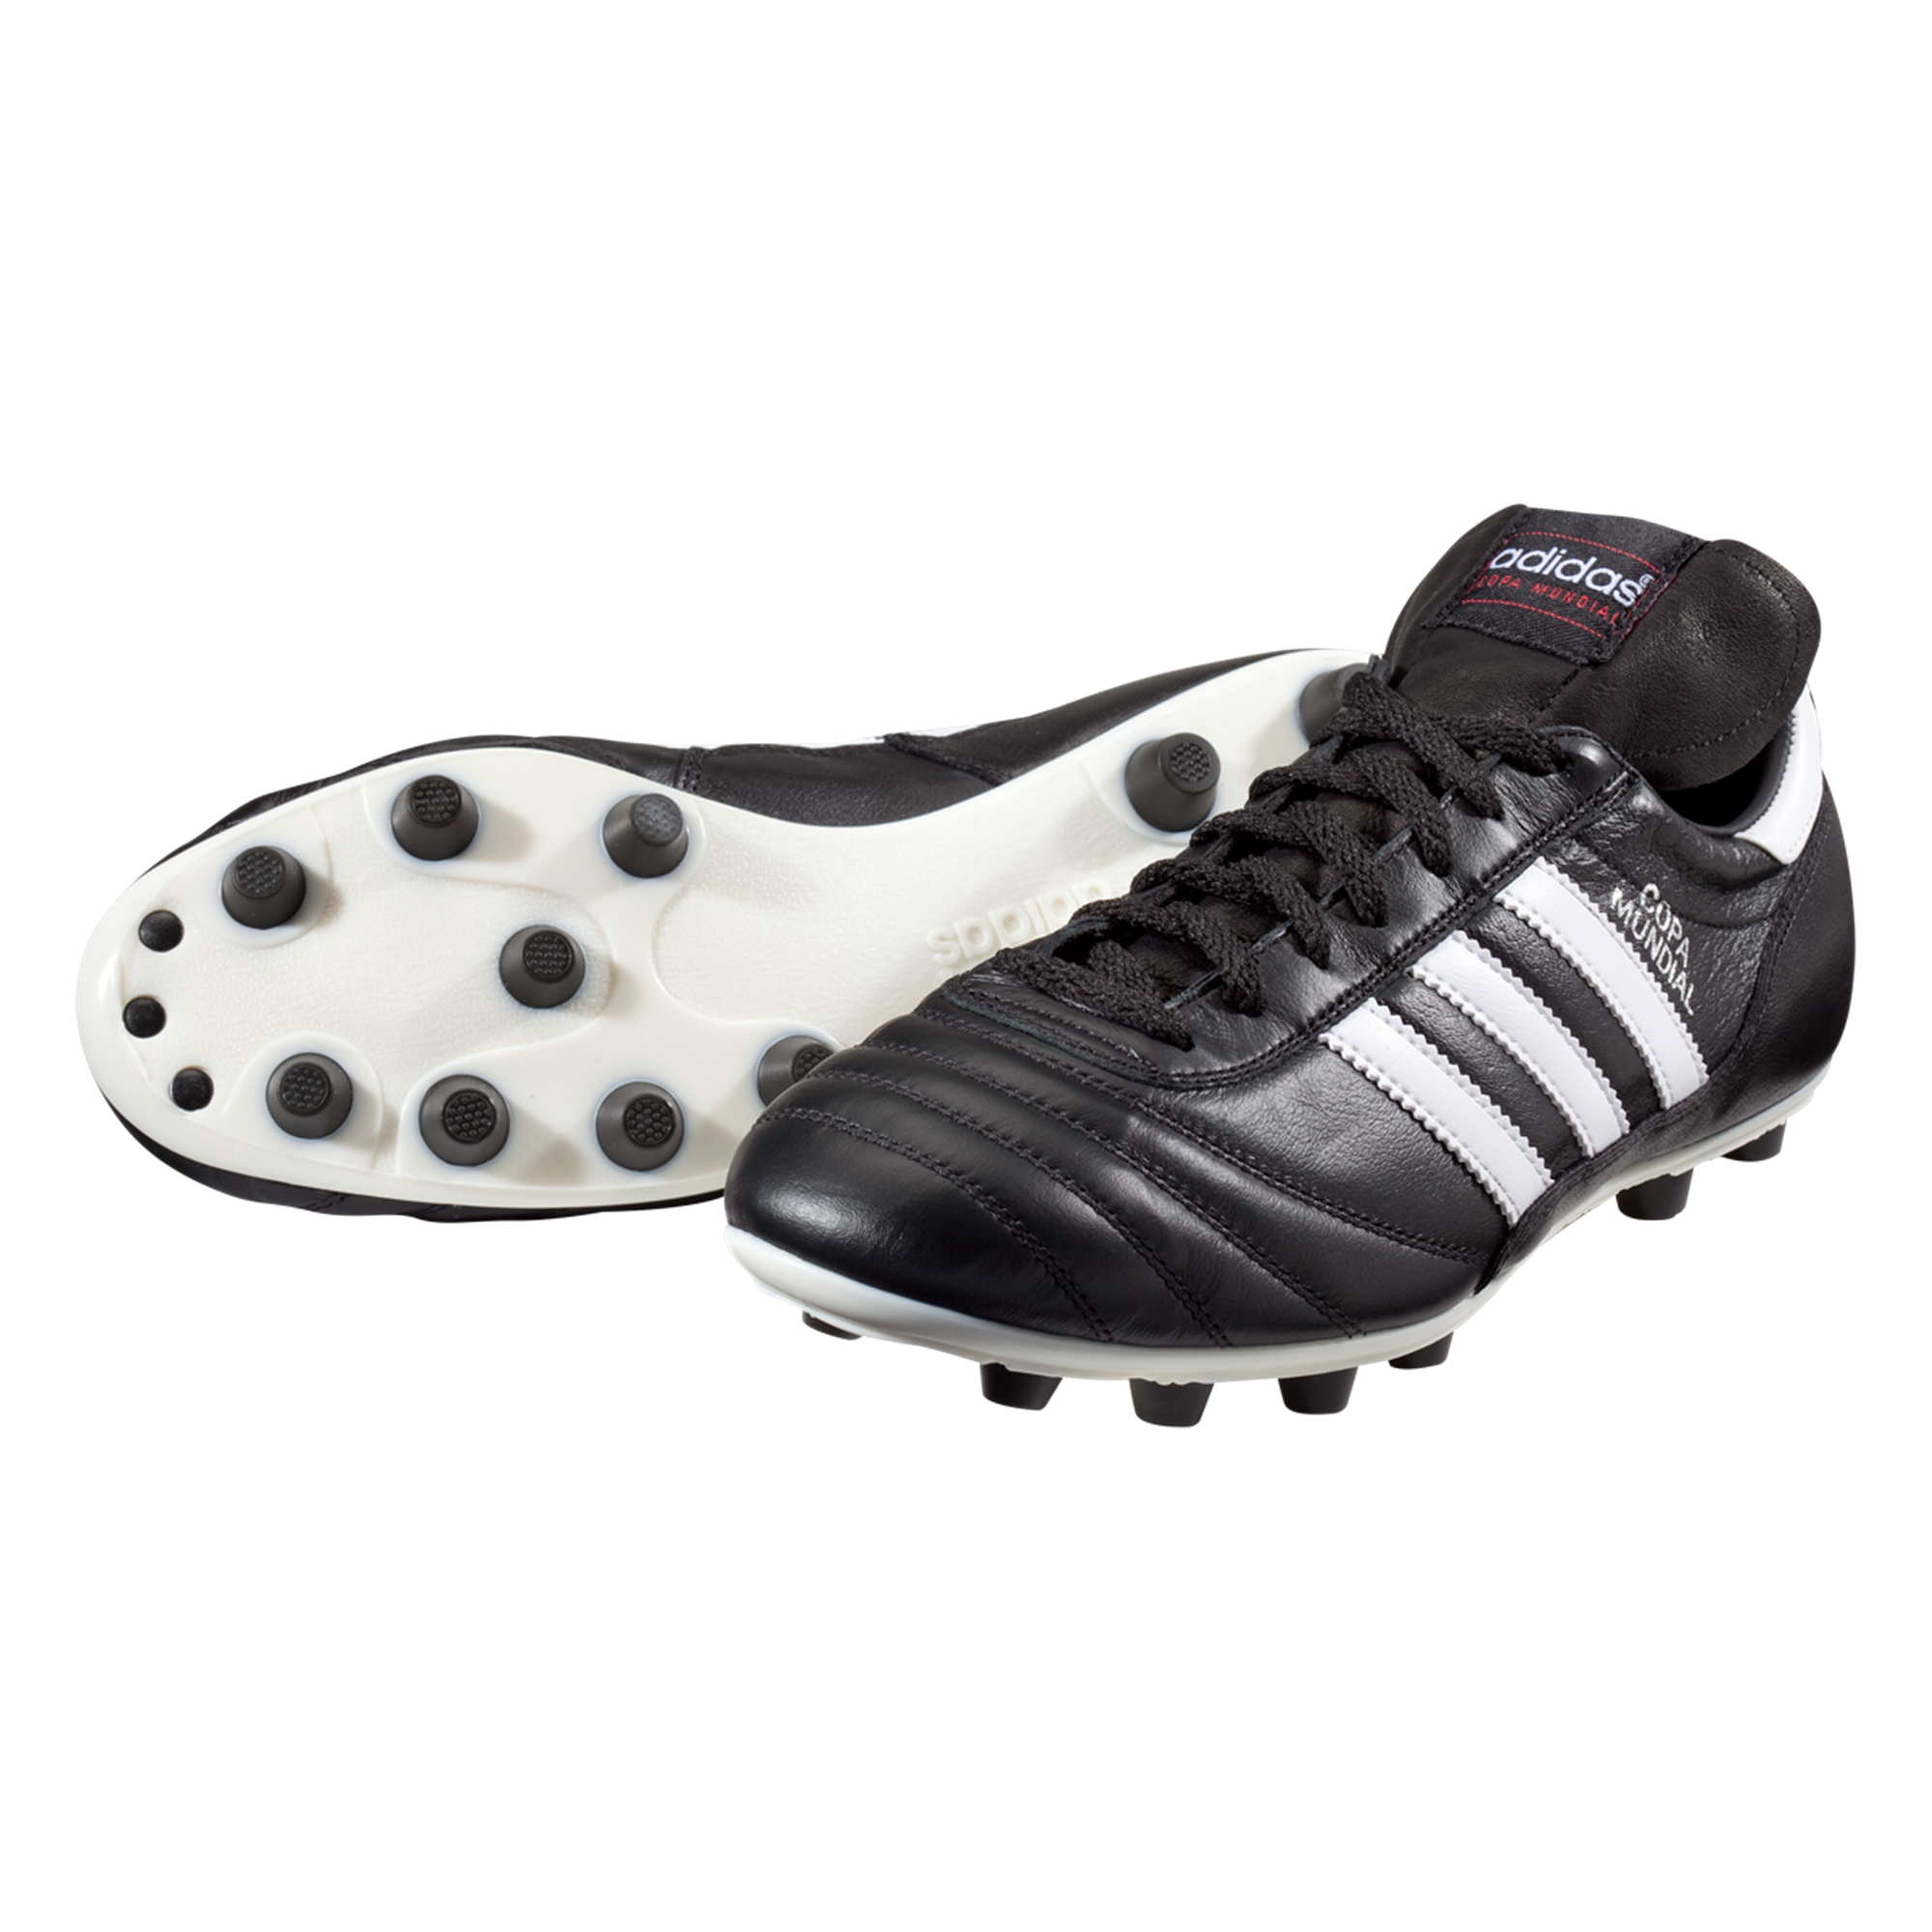 best soccer shoes of all time